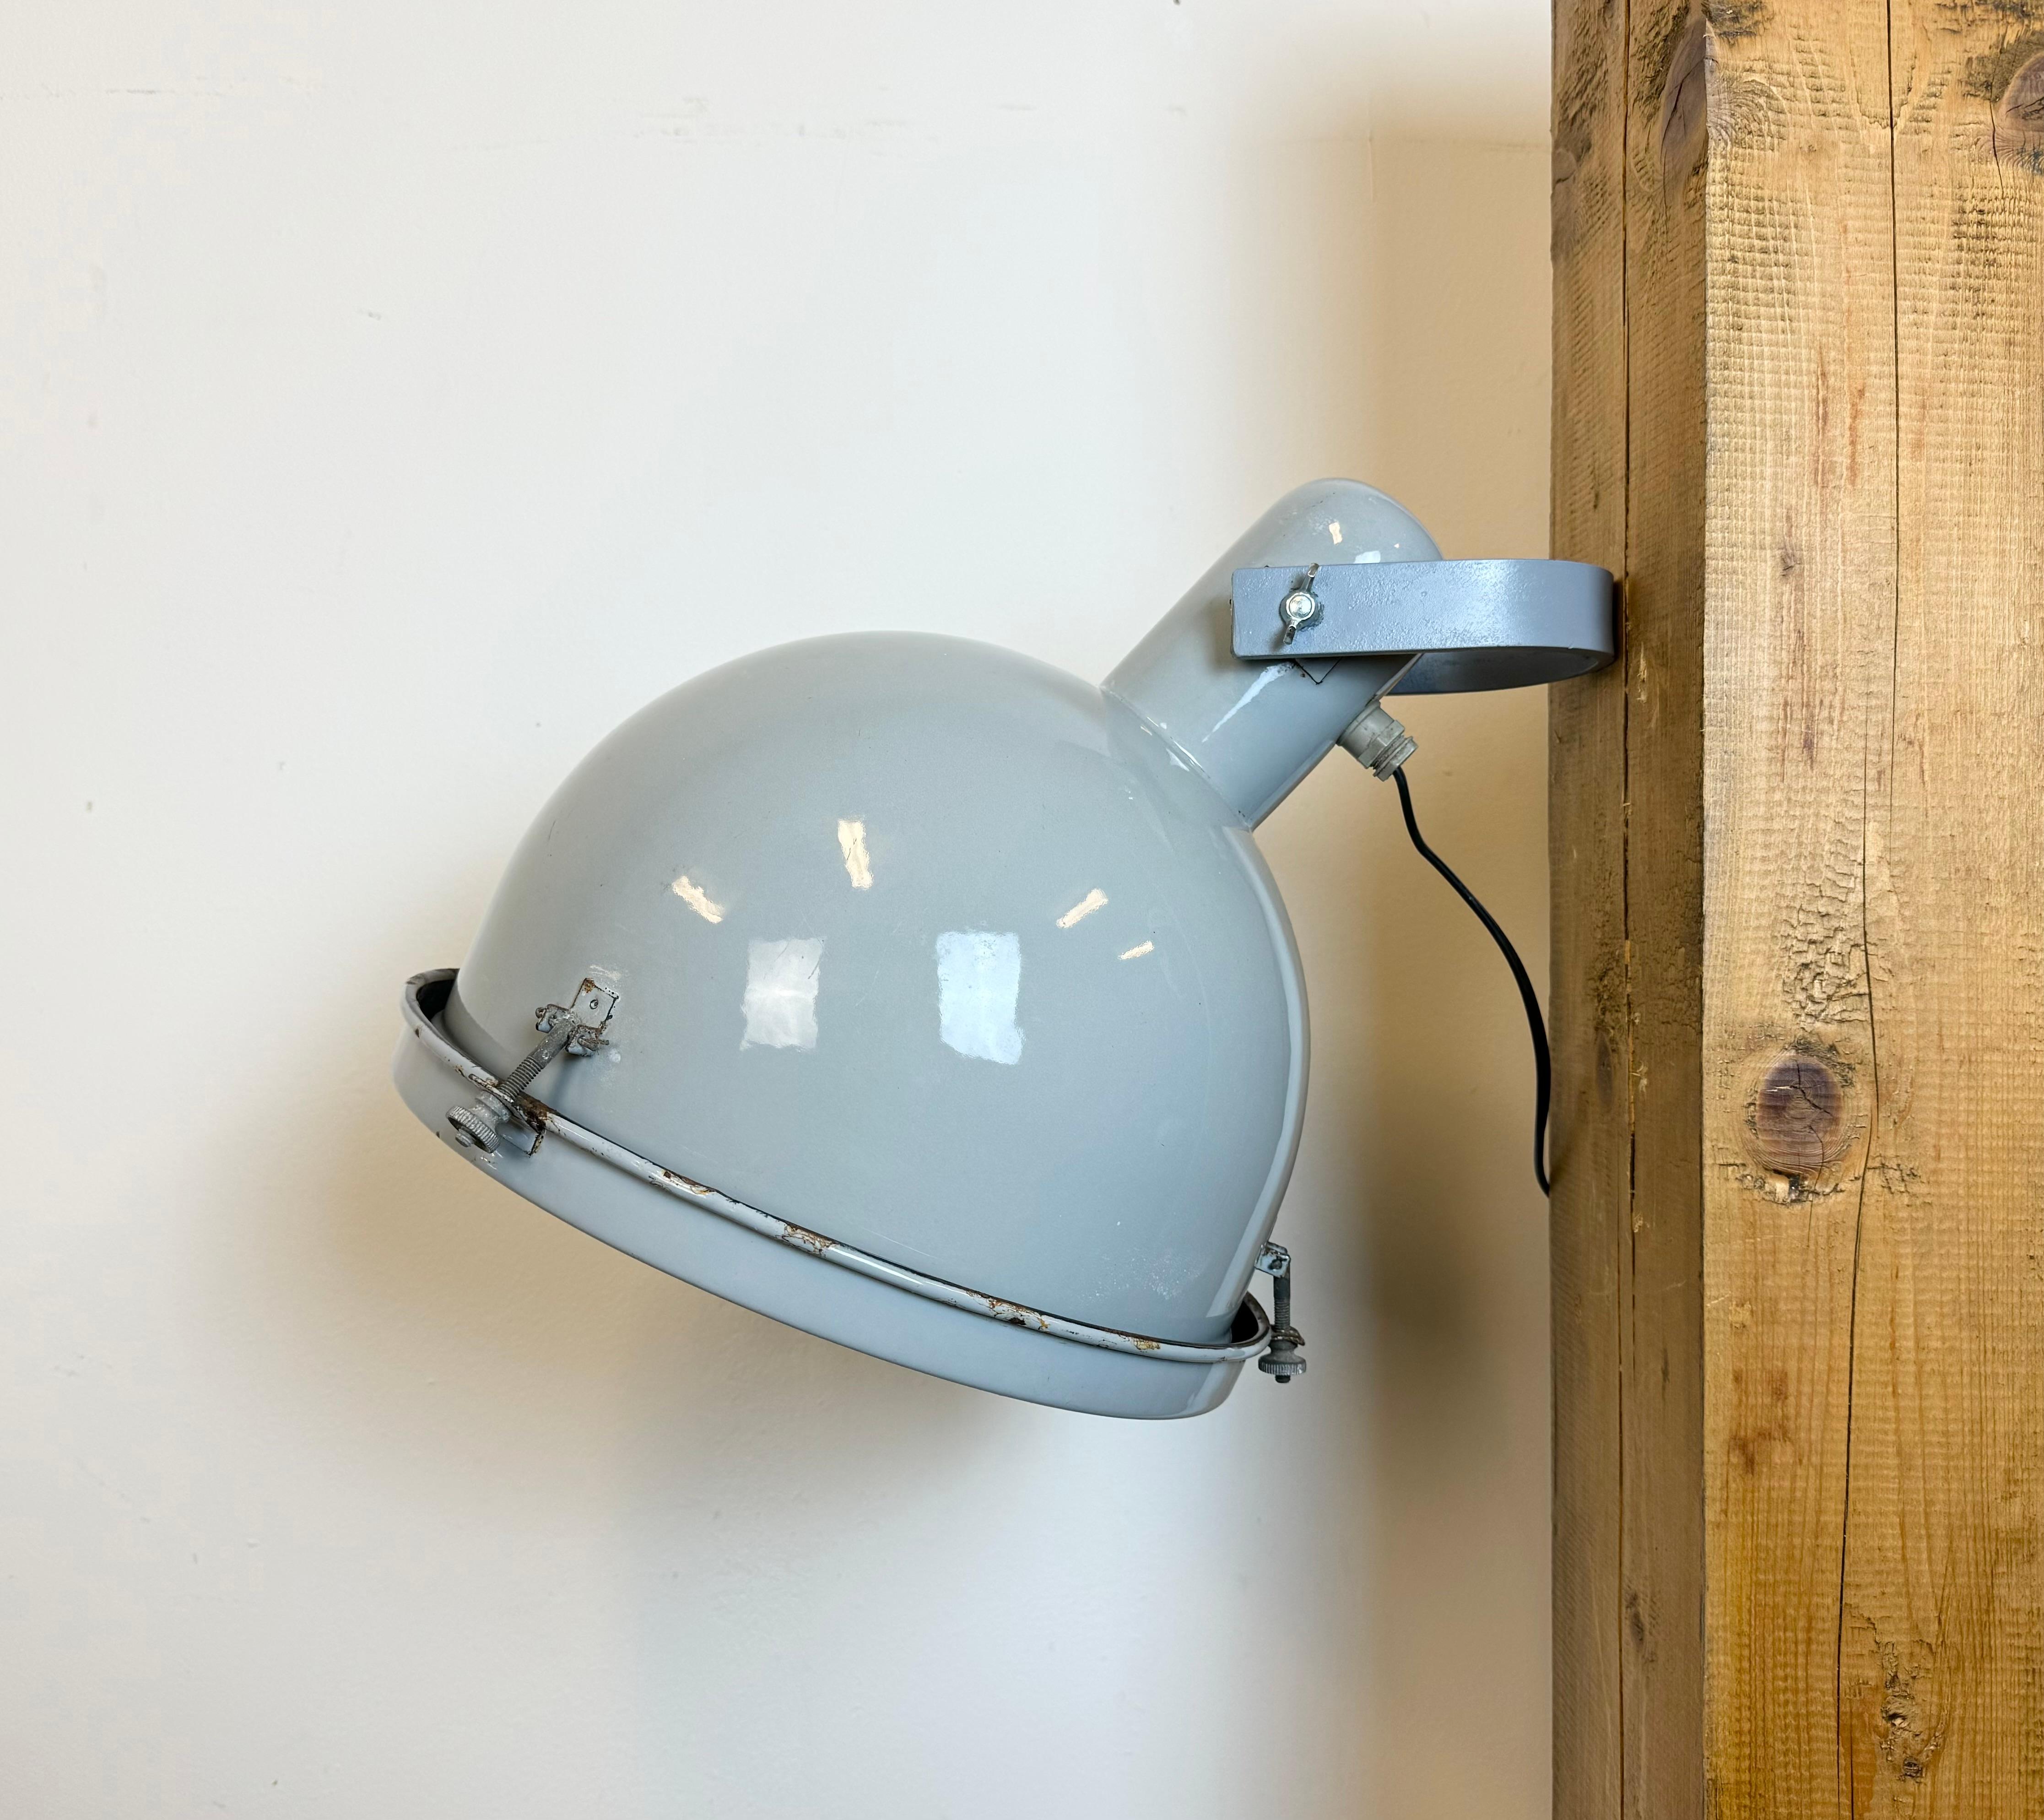 Industrial wall light with adjustable angle made in Italy during the 1960s. It features a  grey  enamel shade with white enamel interior, an iron wall mounting and a clear glass cover. The porcelain socket requires E27/E26 light bulbs. New